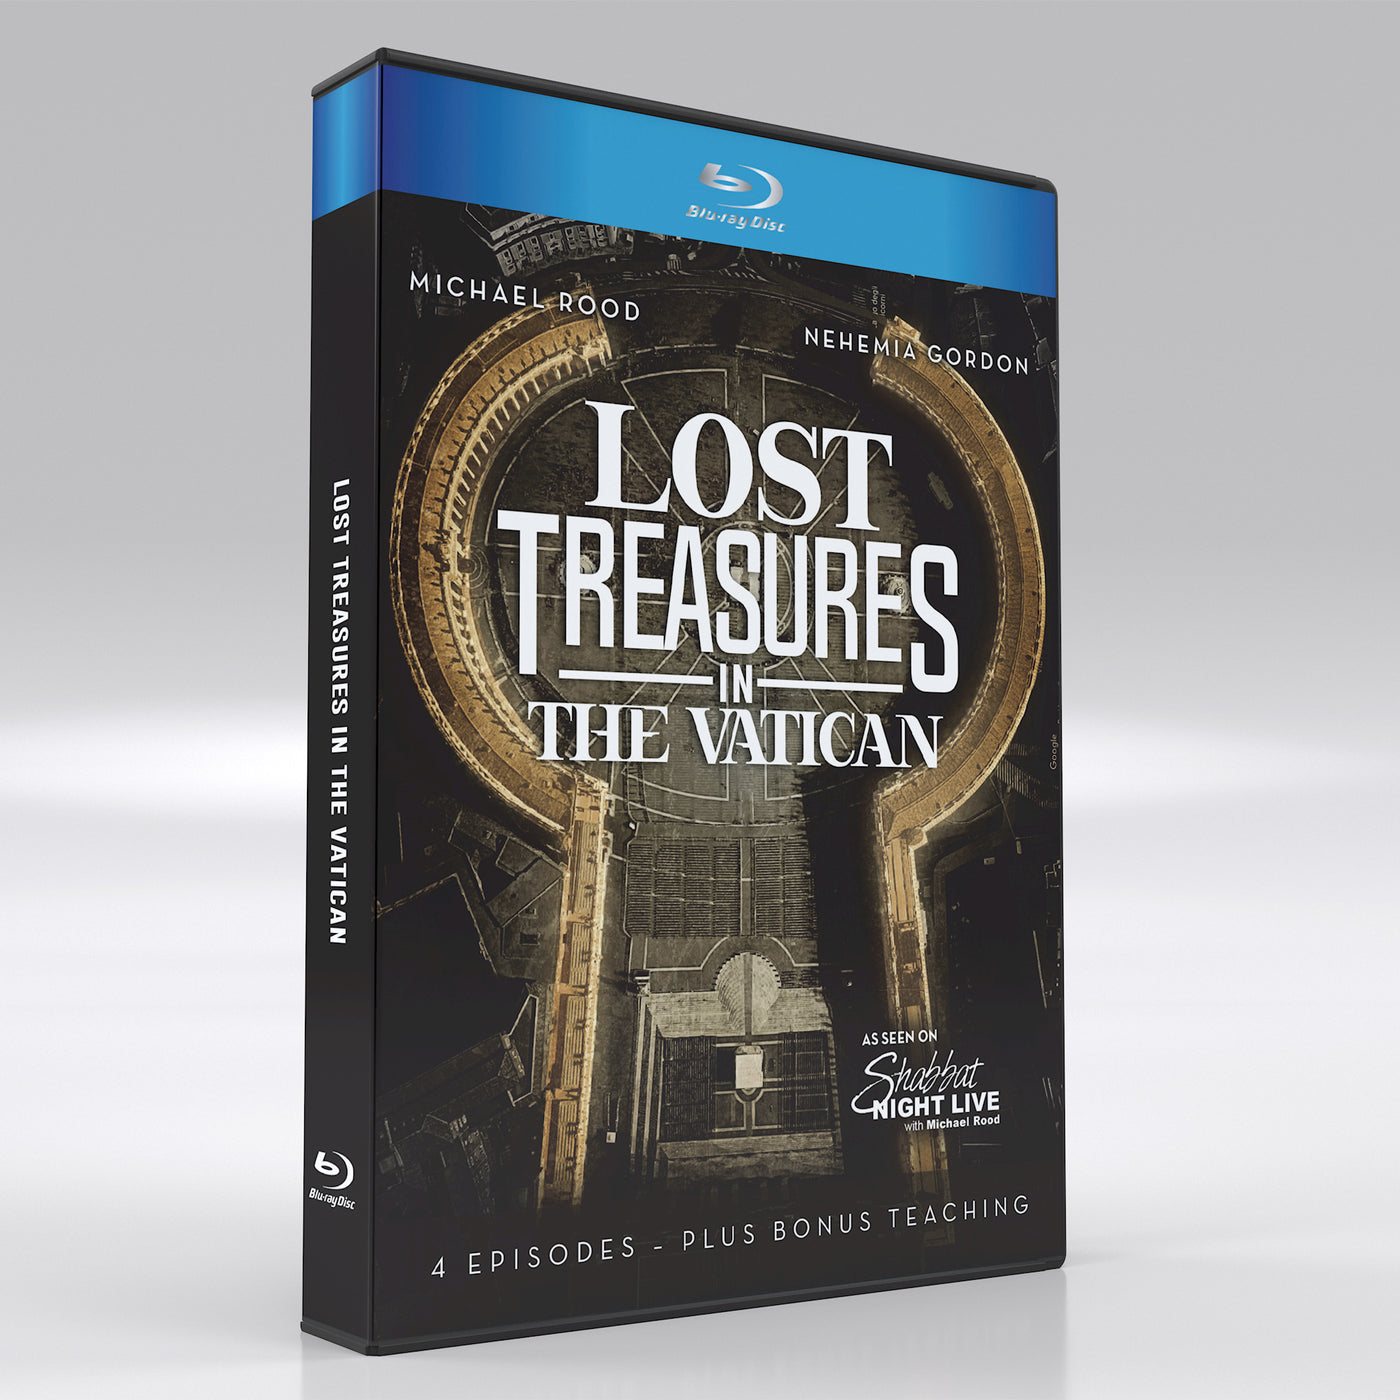 "Lost Treasures in The Vatican" with Michael Rood and Nehemia Gordon